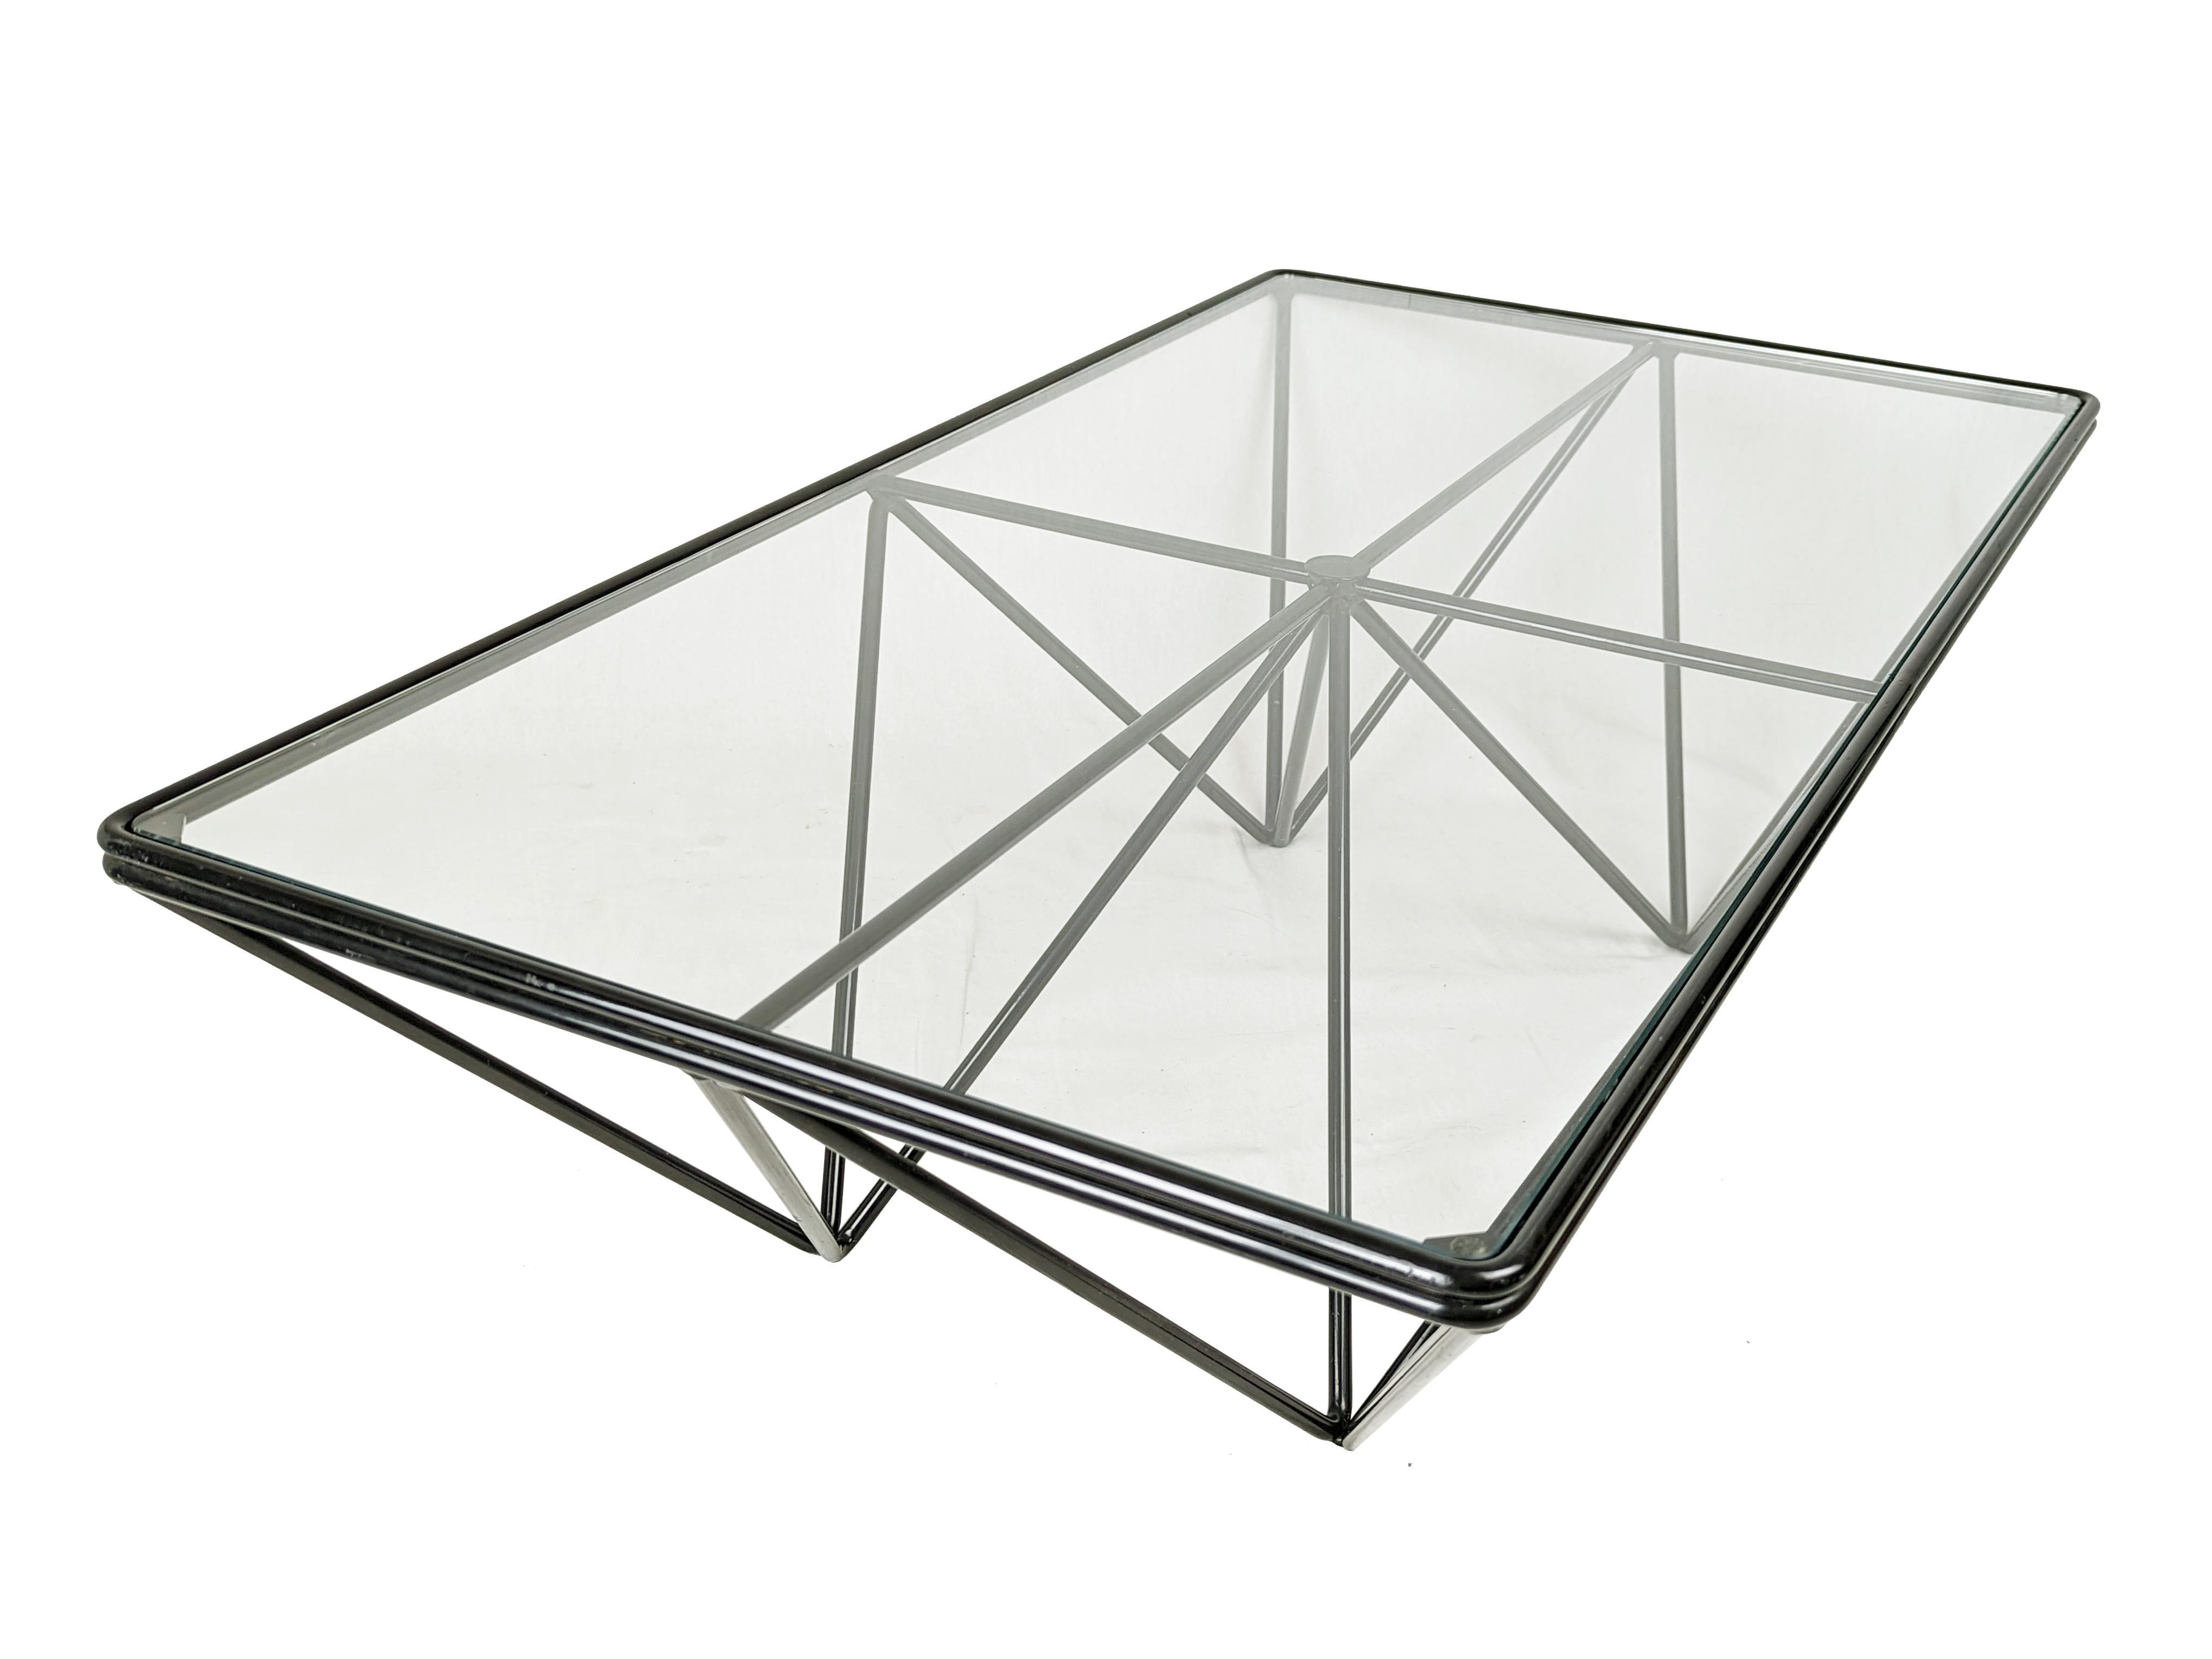 Coffee table with black metal rod structure and glass top attributed to Paolo Piva for B&B Italia. Good condition: light wear on the metal structure. Some very light chips on the glass halfway along the long side near the supports.